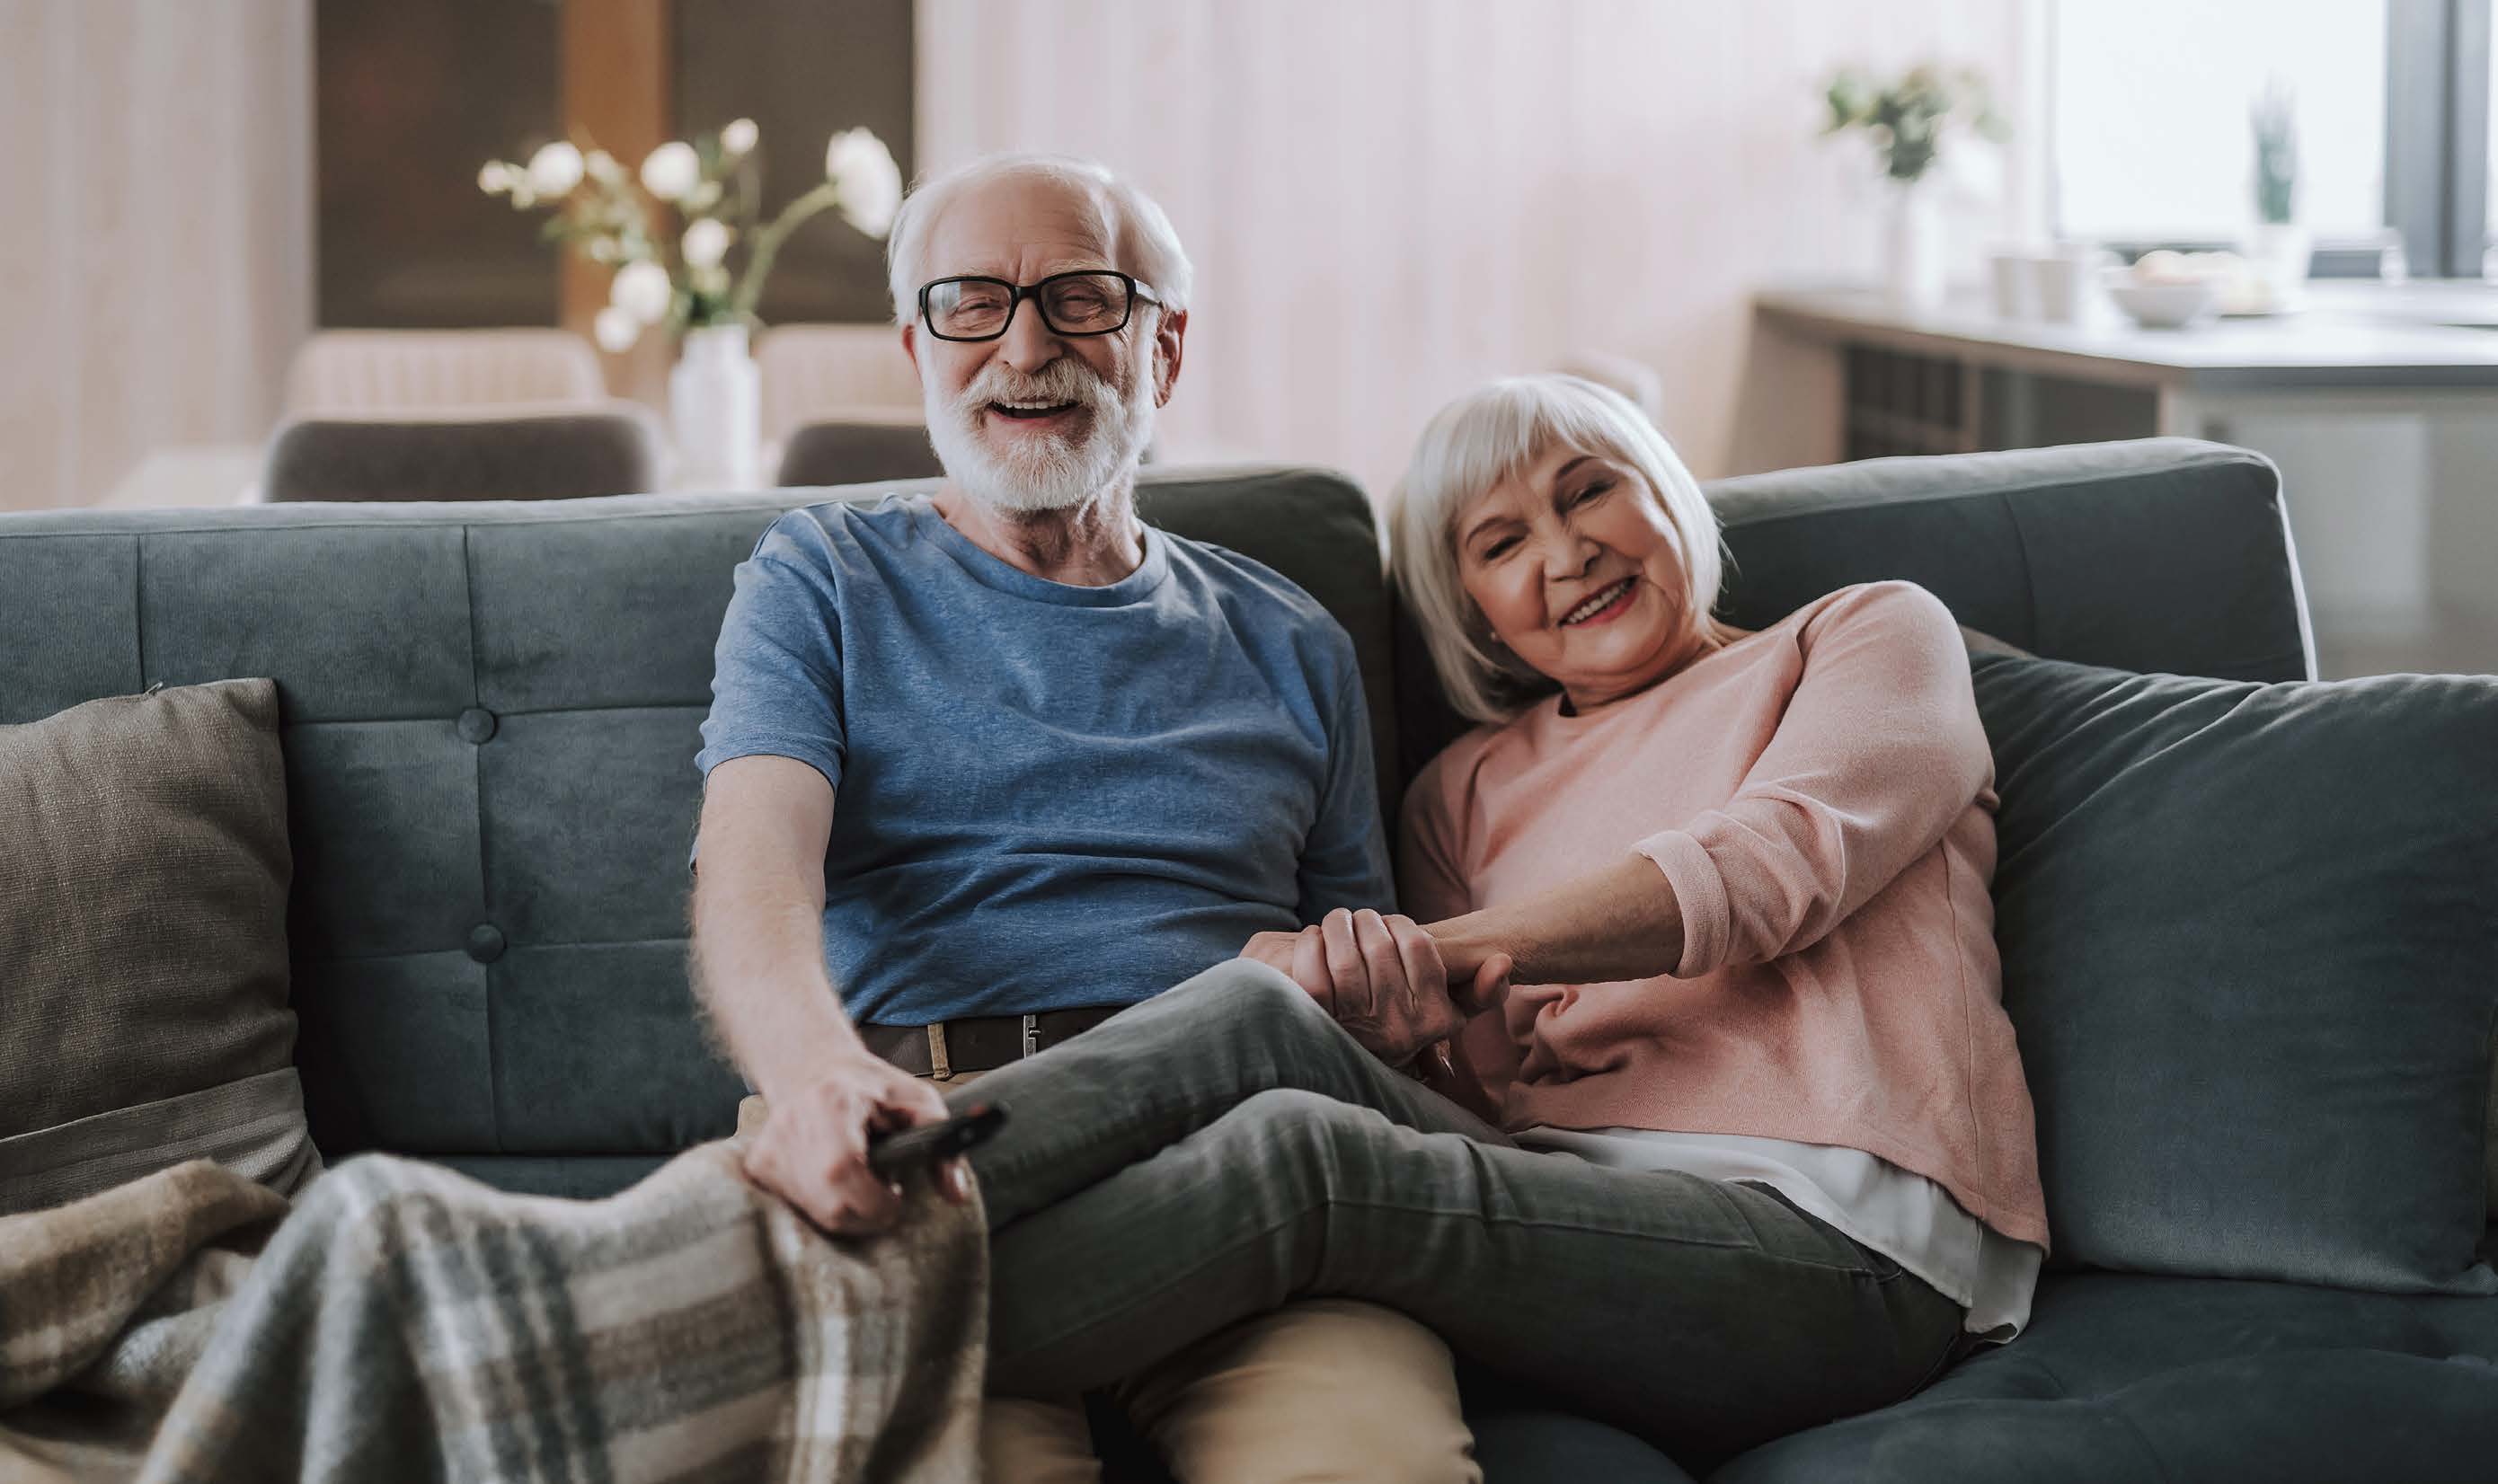 Elderly couple sitting on a couch comfortably and holding hands while laughing towards the camera